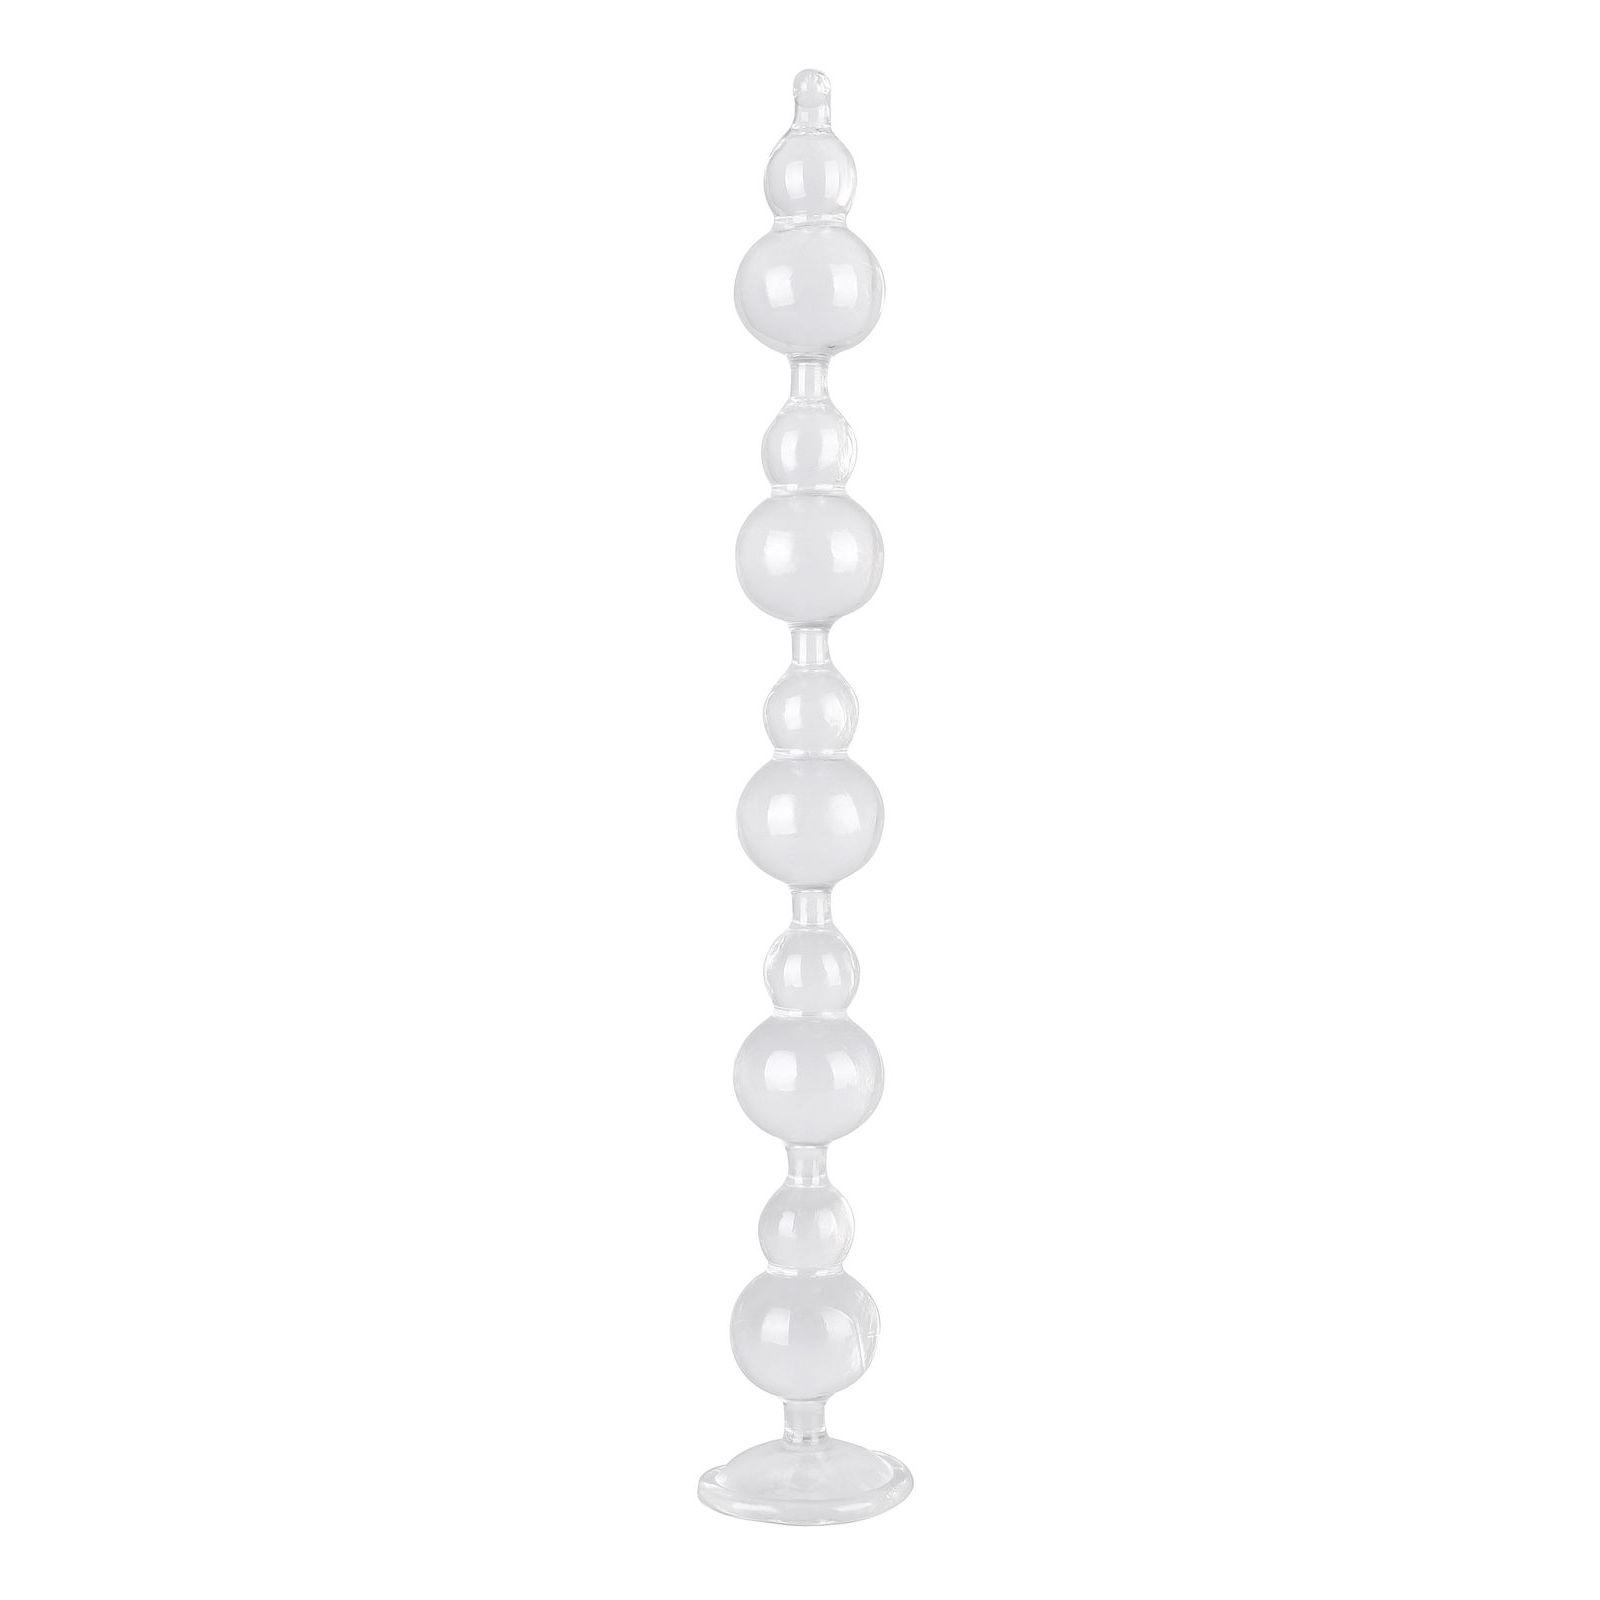 36-62cm Super Long 5 Gourd Shape Ball Beads Anal Dildo Butt Plugs Trainer Anus Intercourse Sexy Toy Sutton Cup For Men Women Gay